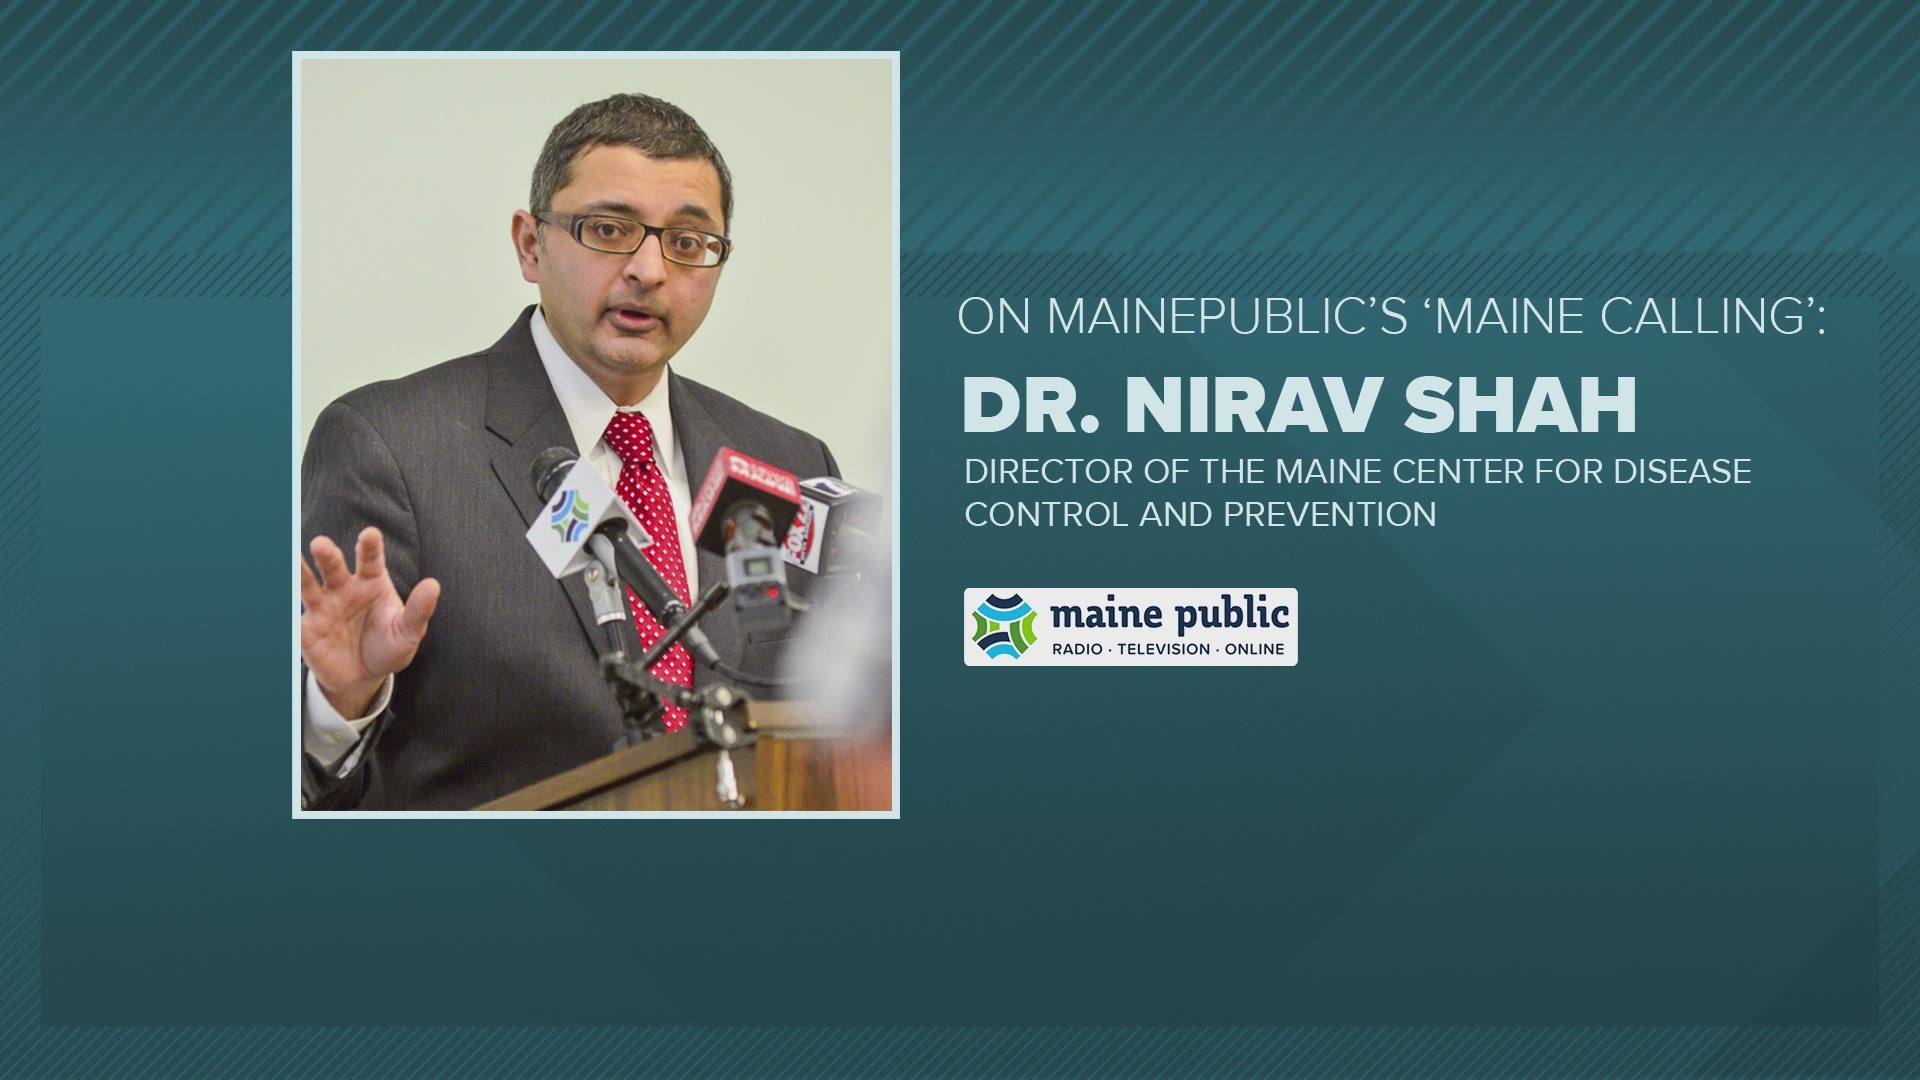 Maine Centers for Disease Control & Prevention Director Dr. Nirav Shah said Mainers are among the most vaccinated people on the planet